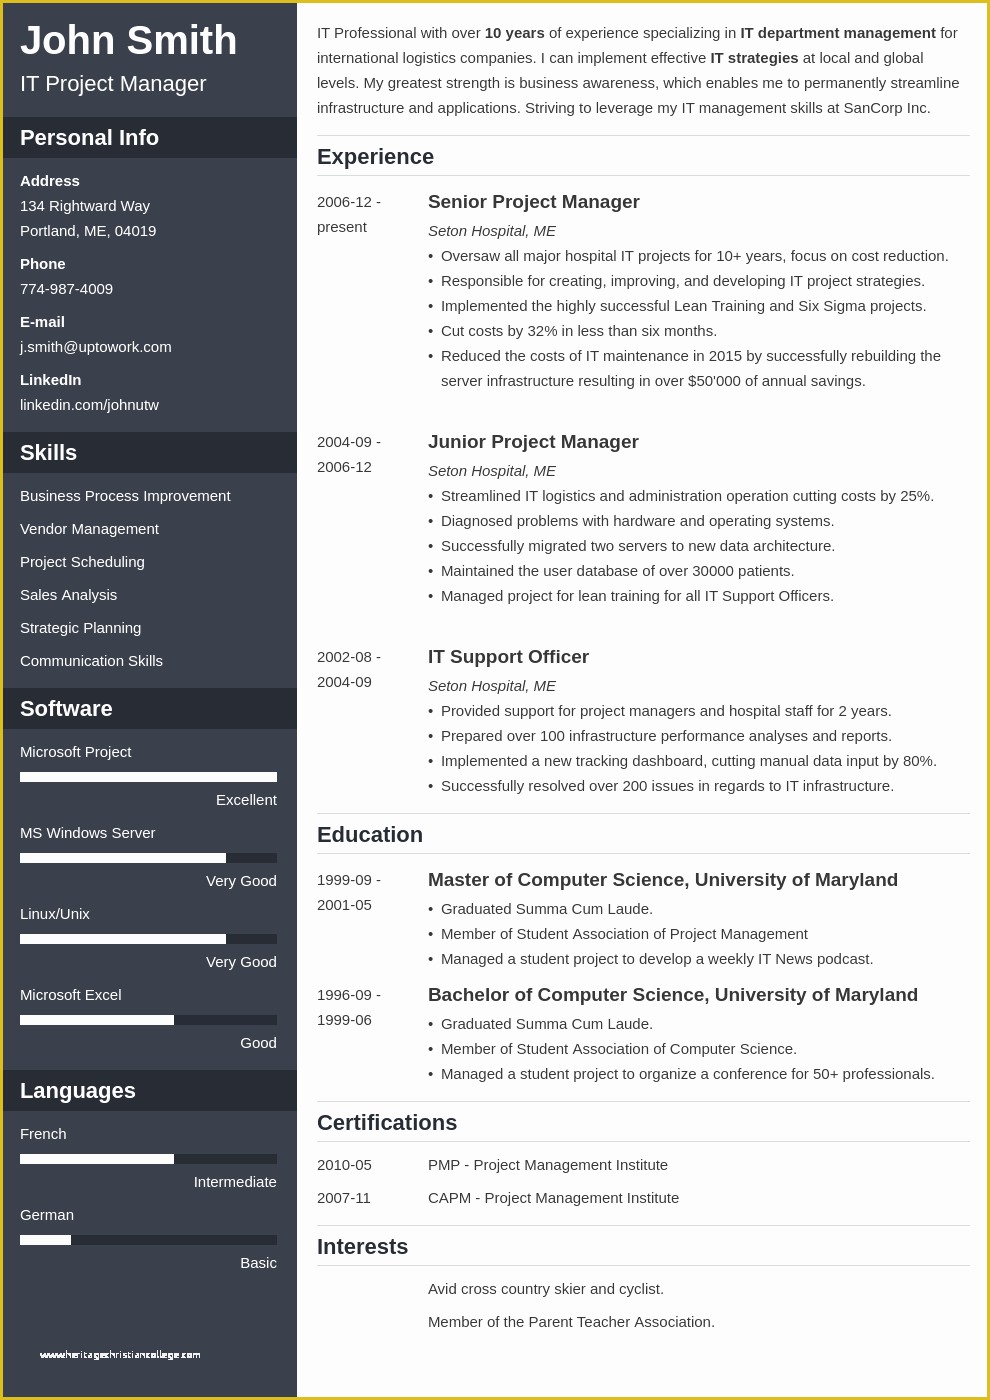 Free Resume Templates Of Line Resume Builder Build Your Perfect Resume now Just